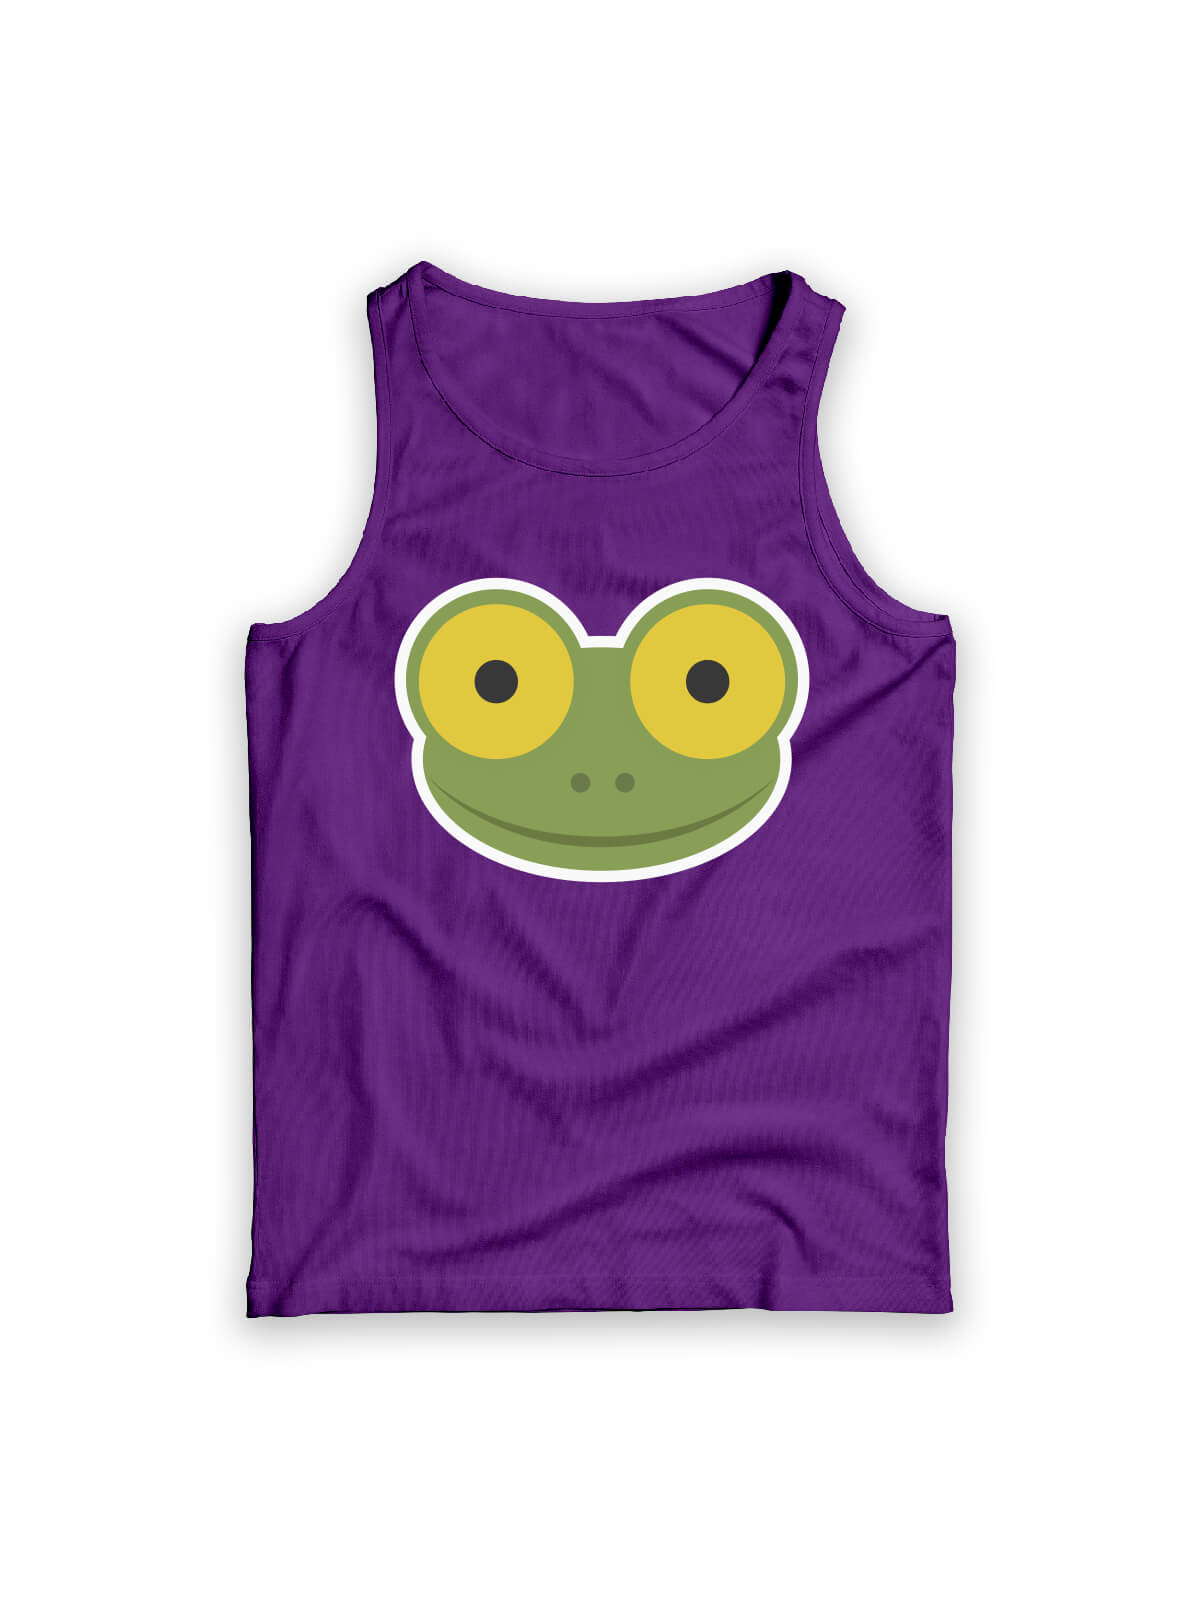 purple tank top with Mike the frog face